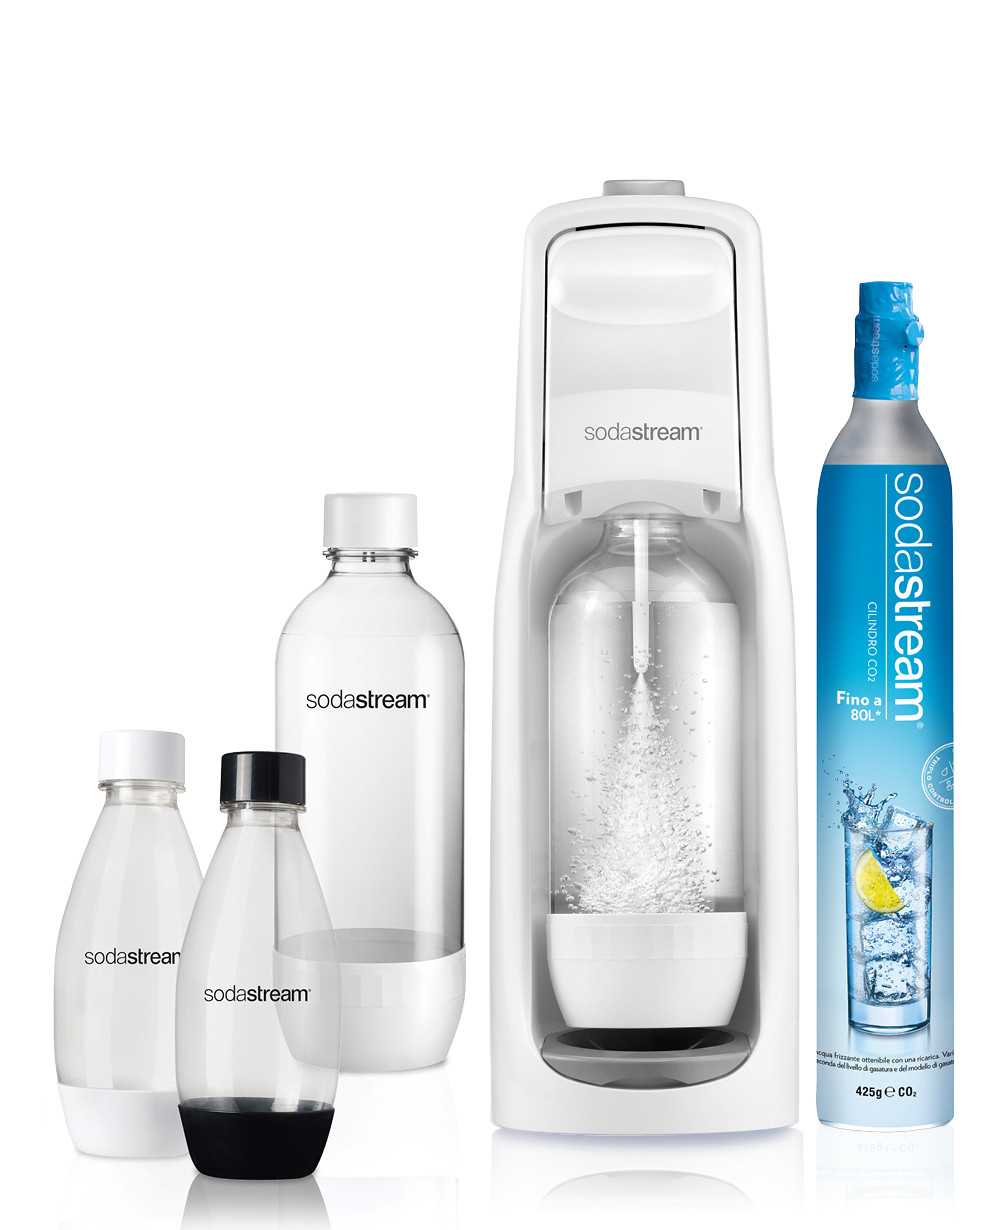 https://www.sodastream.it/file-manager/api/get-image/1589